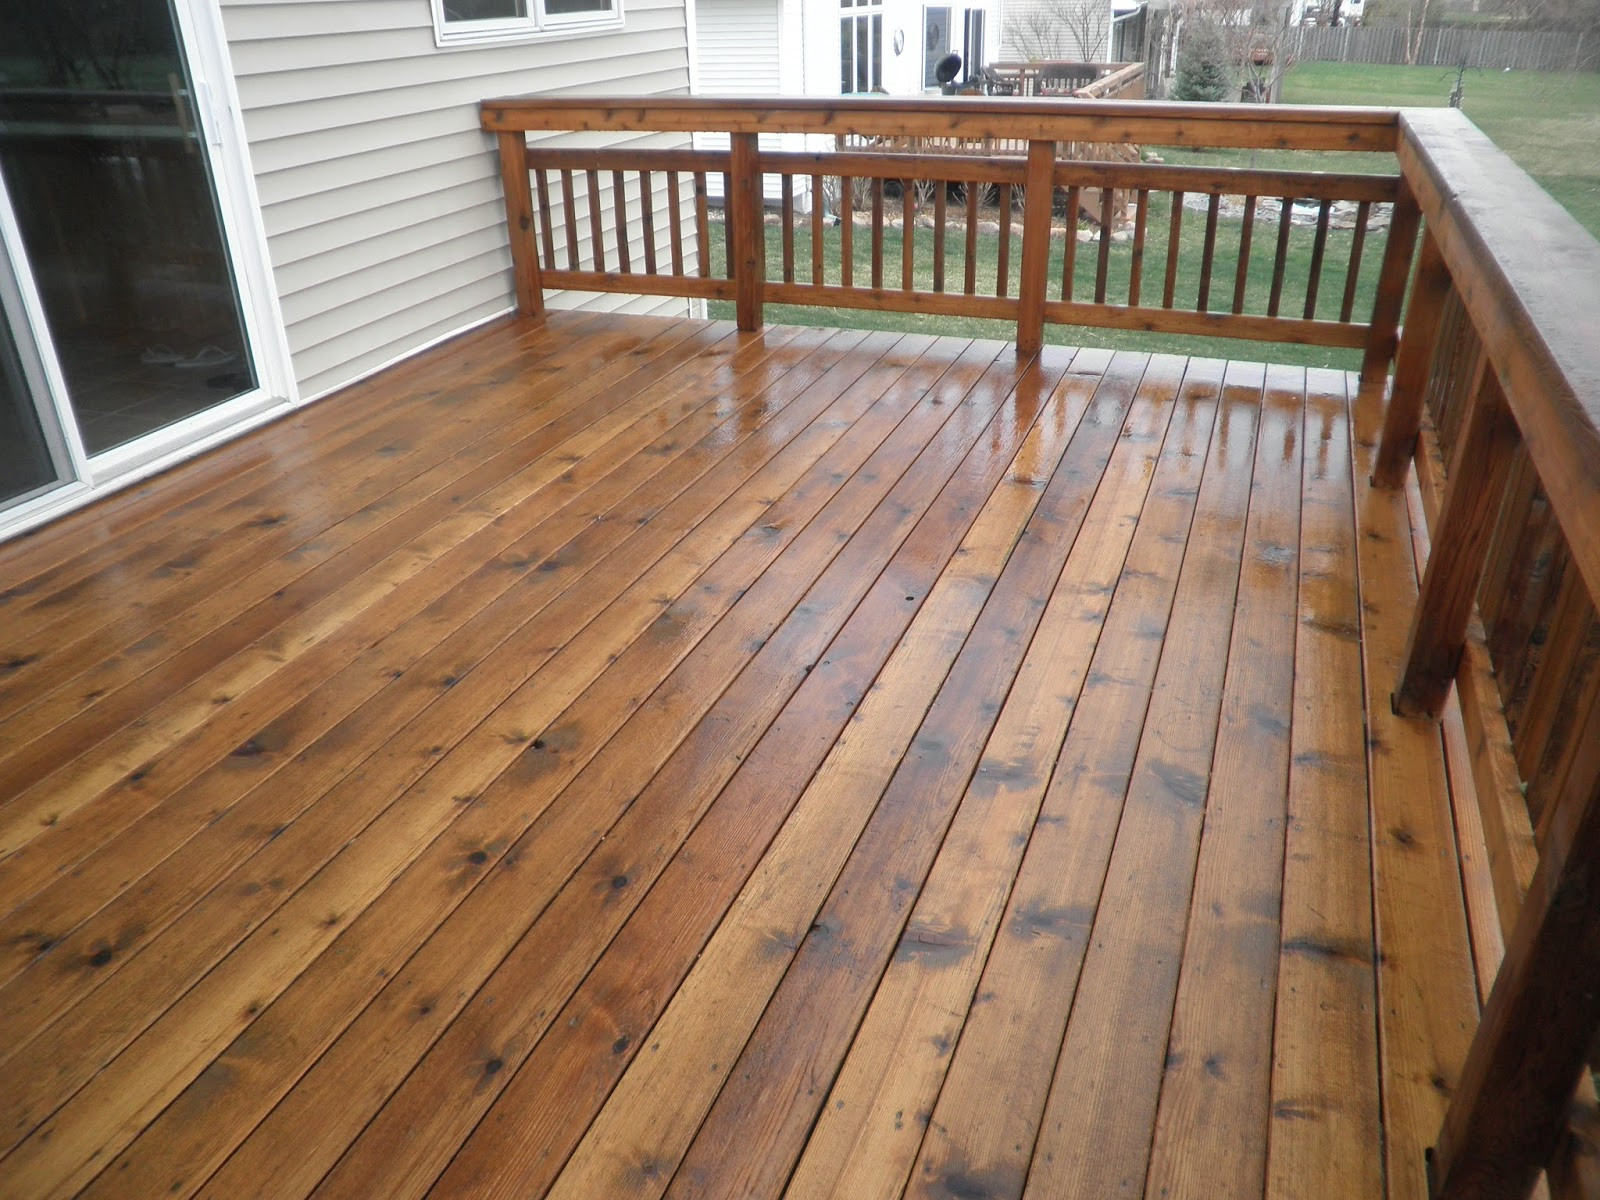 Staining Versus Painting Deck
 Maze Lumber Decking 101 Stain vs Paint vs Seal